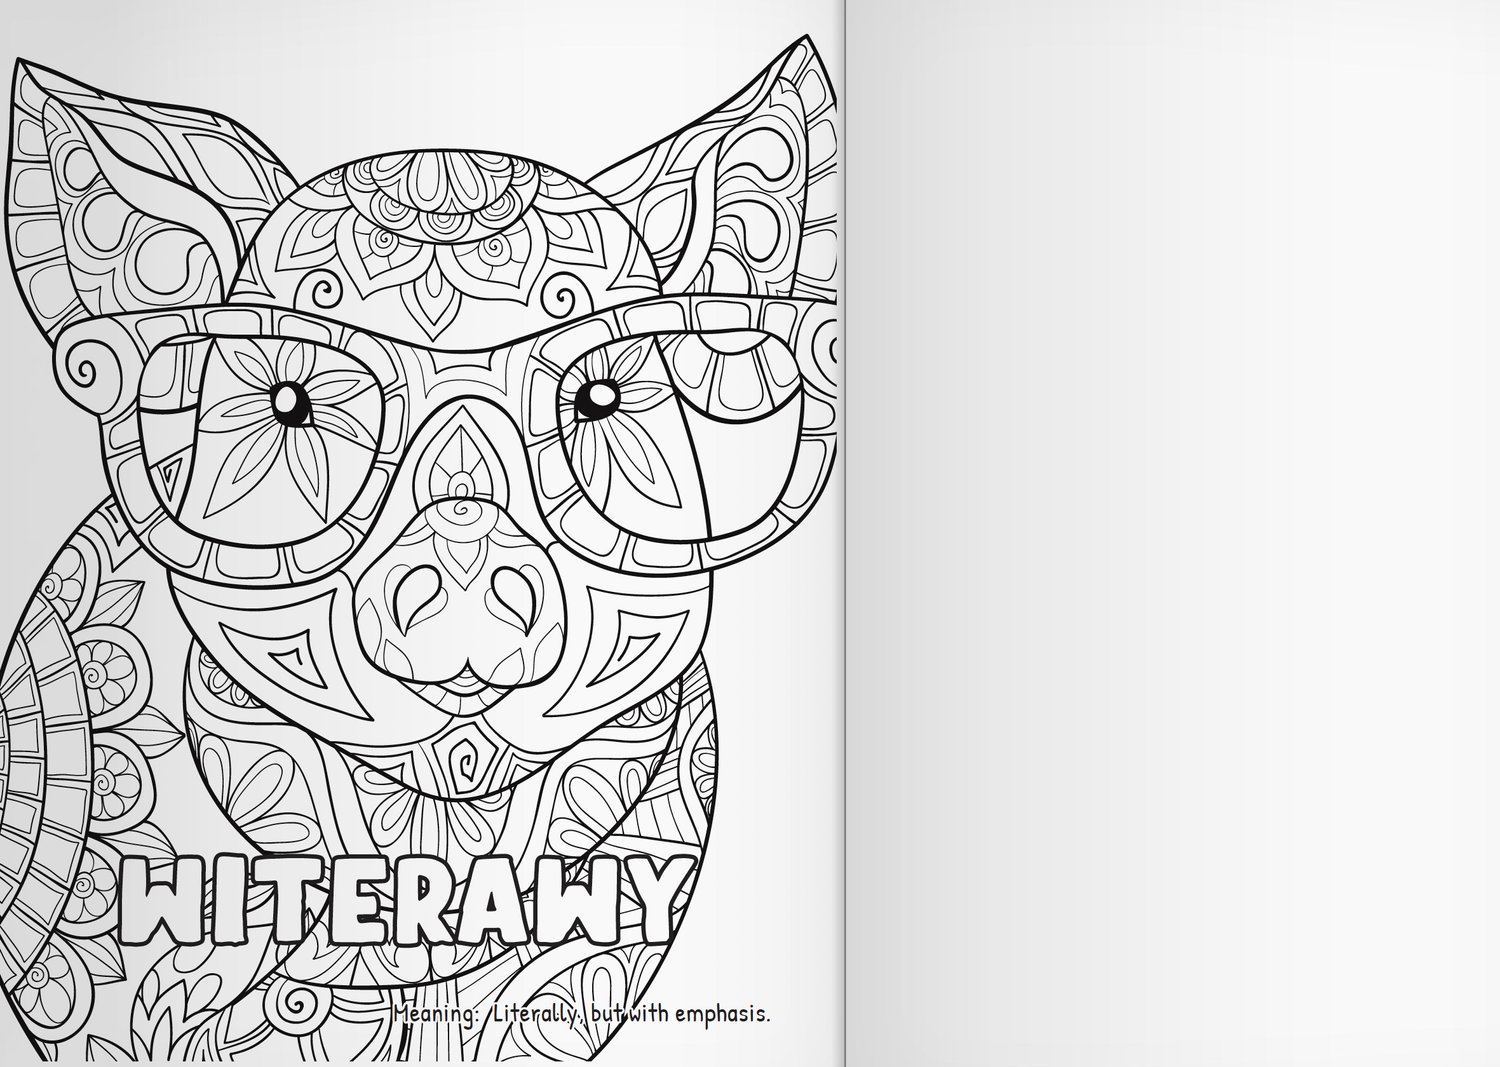 Why Adult Coloring Books Are So Popular — PILGRIM SOUL CREATIVE